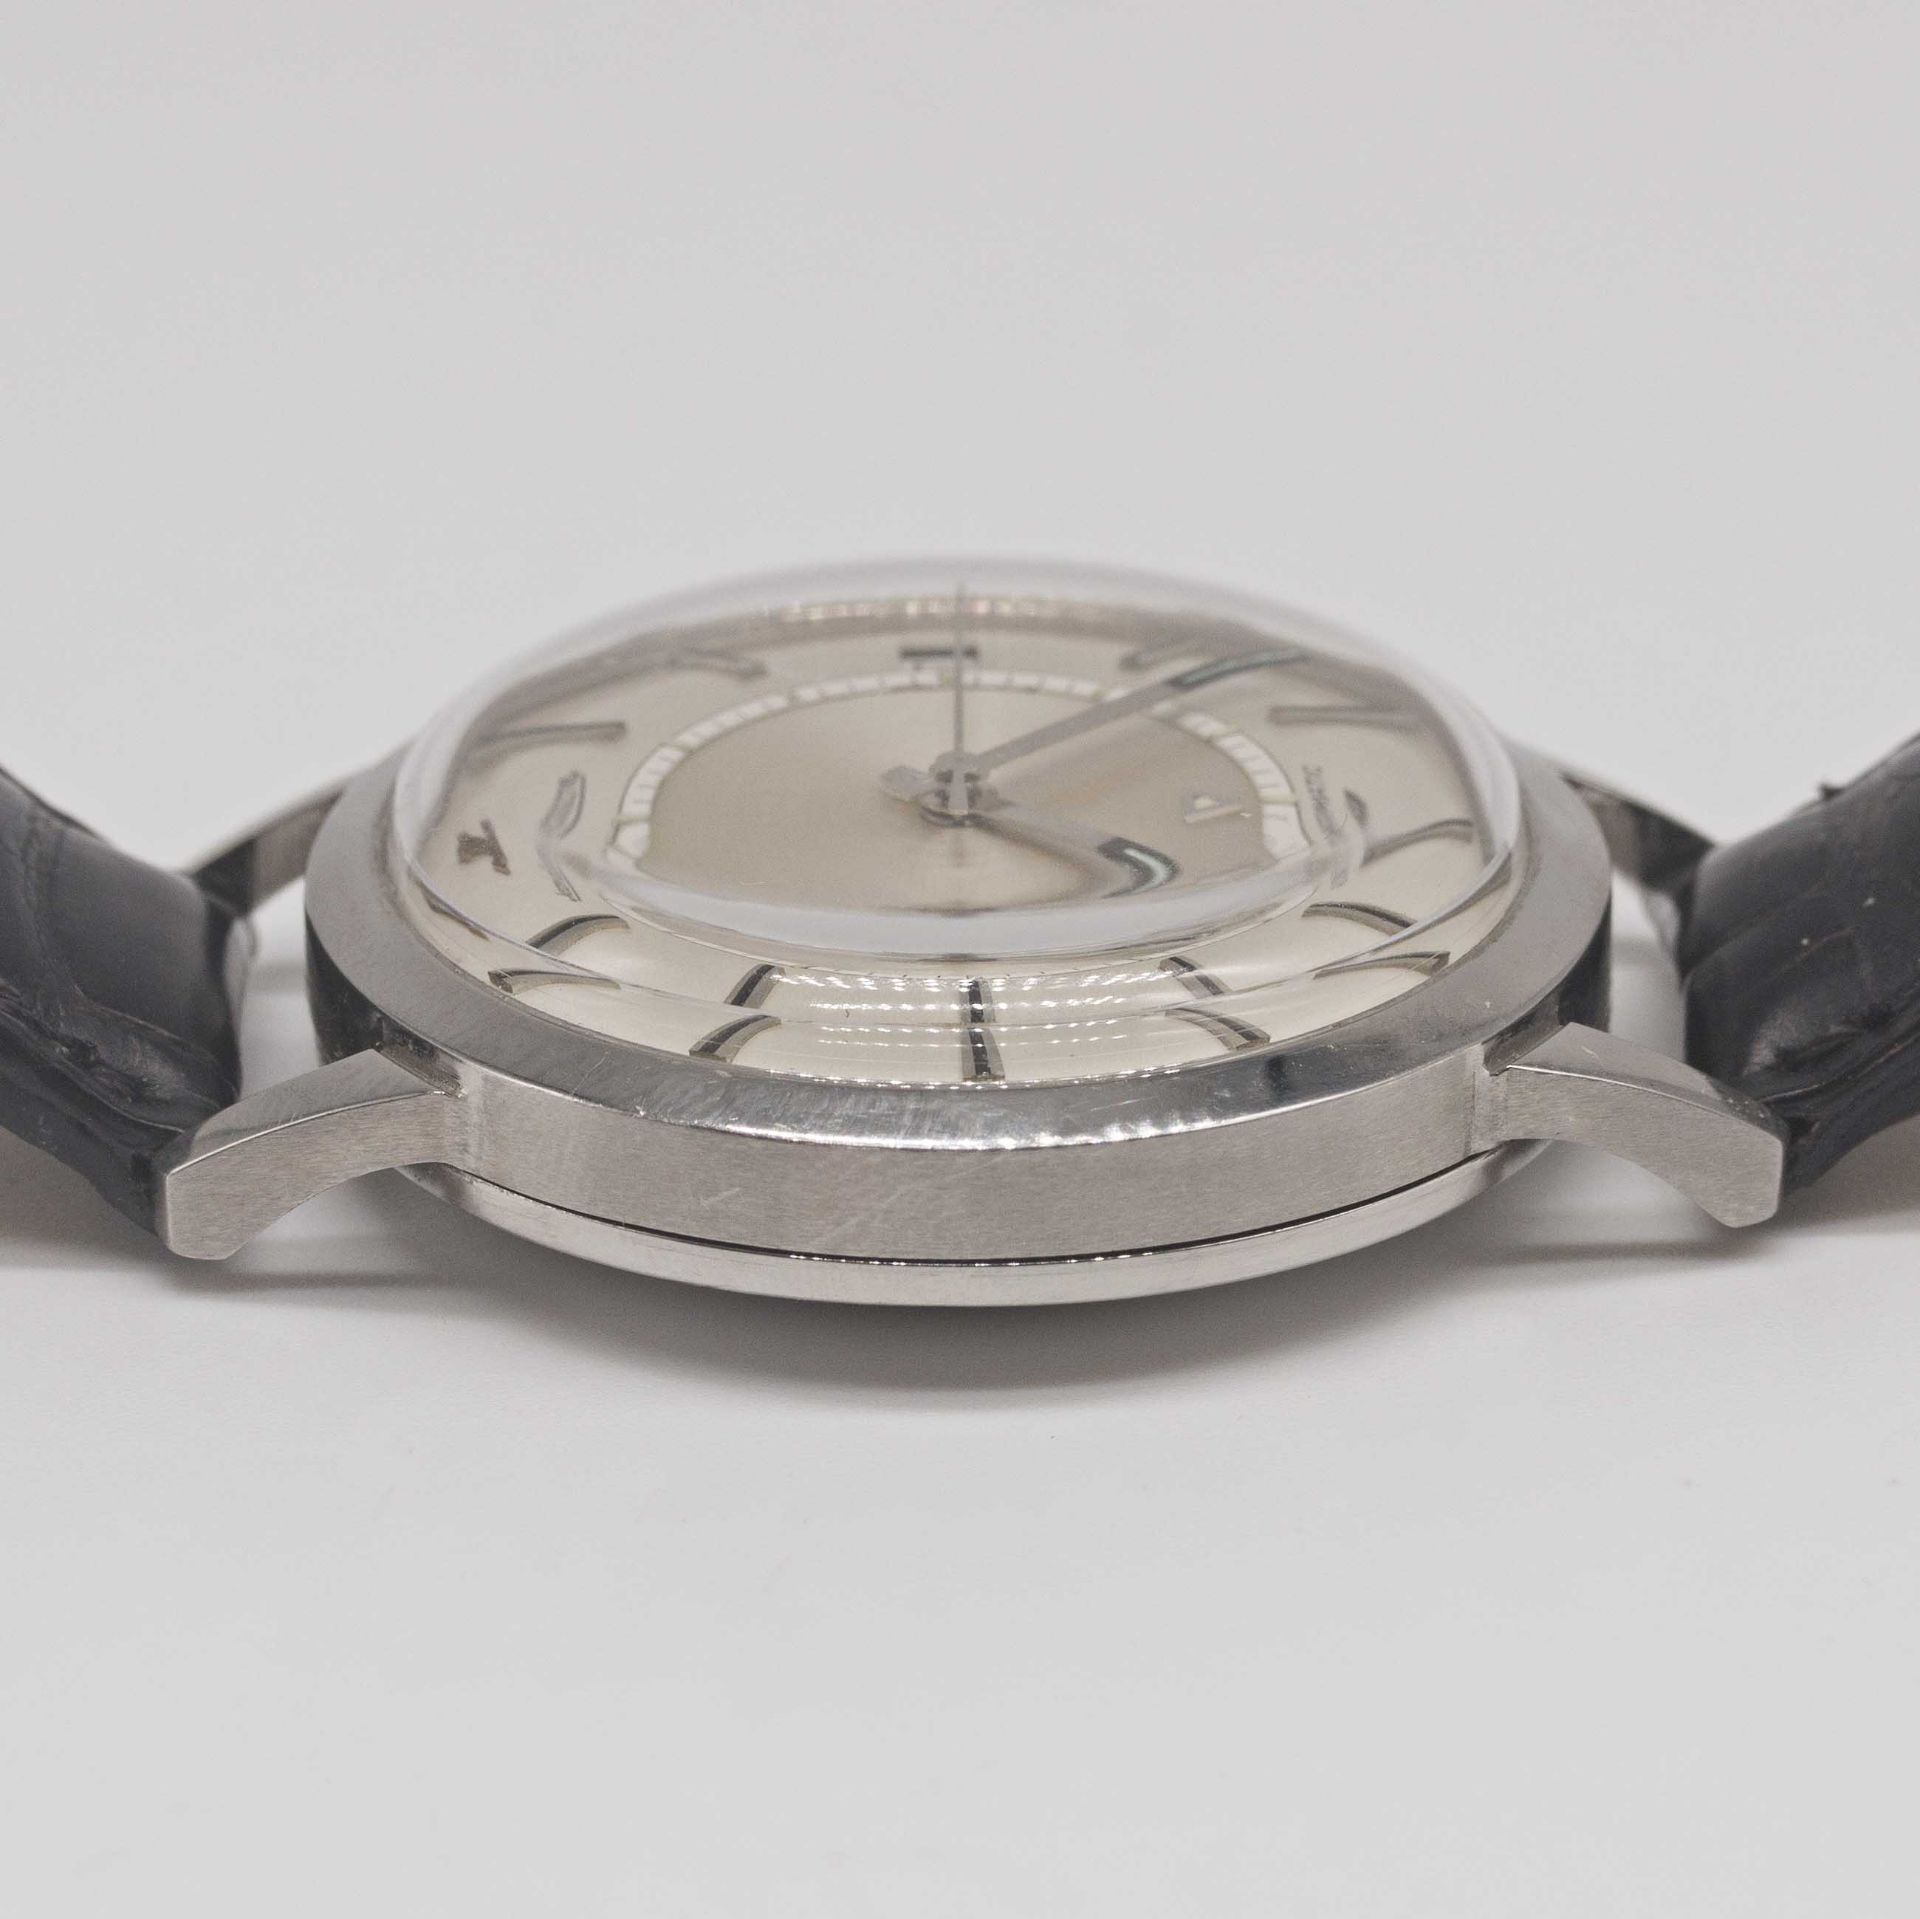 A GENTLEMAN'S STAINLESS STEEL JAEGER LECOULTRE MEMOVOX AUTOMATIC ALARM WRIST WATCH CIRCA 1960s, REF. - Image 9 of 9